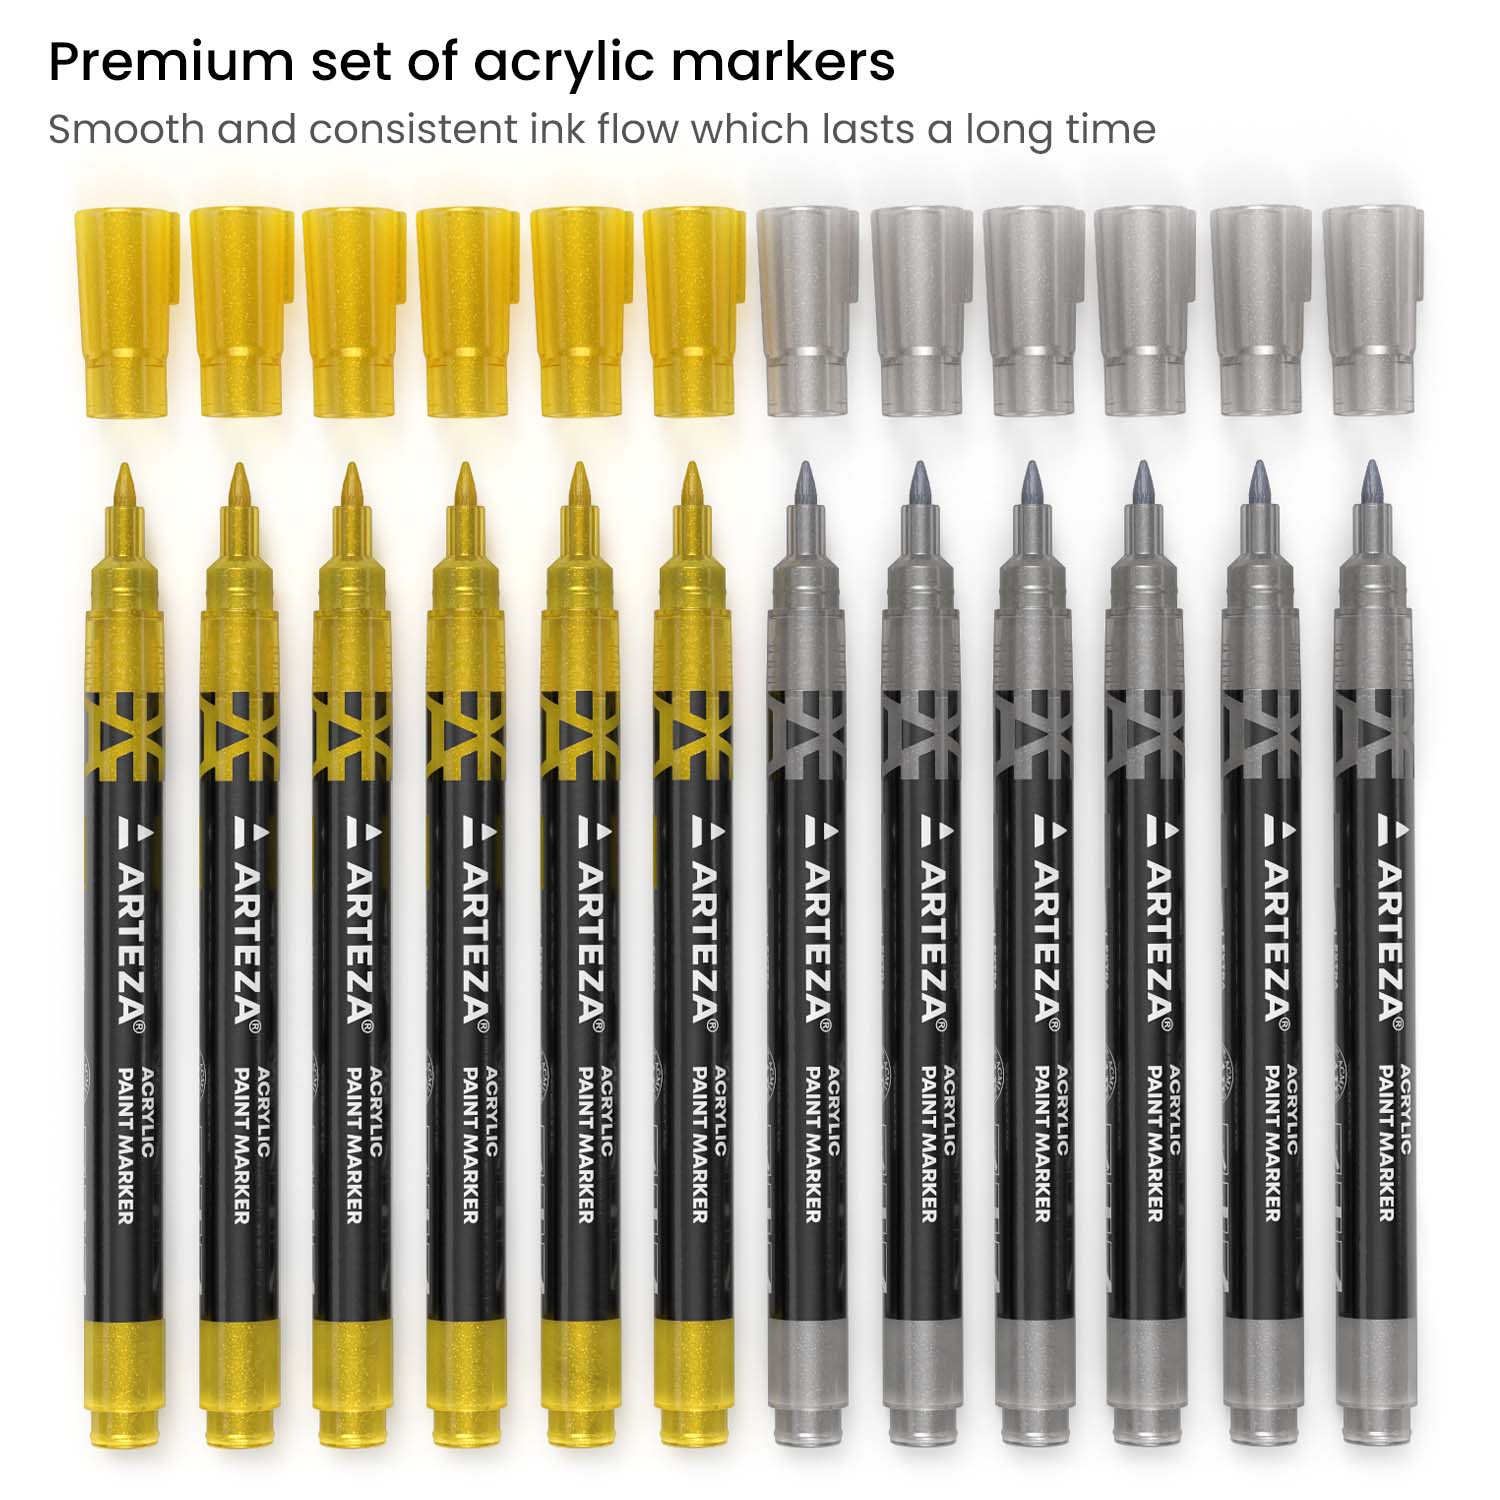 Acrylic Markers – Zscm The world of painting art, art painting dreams